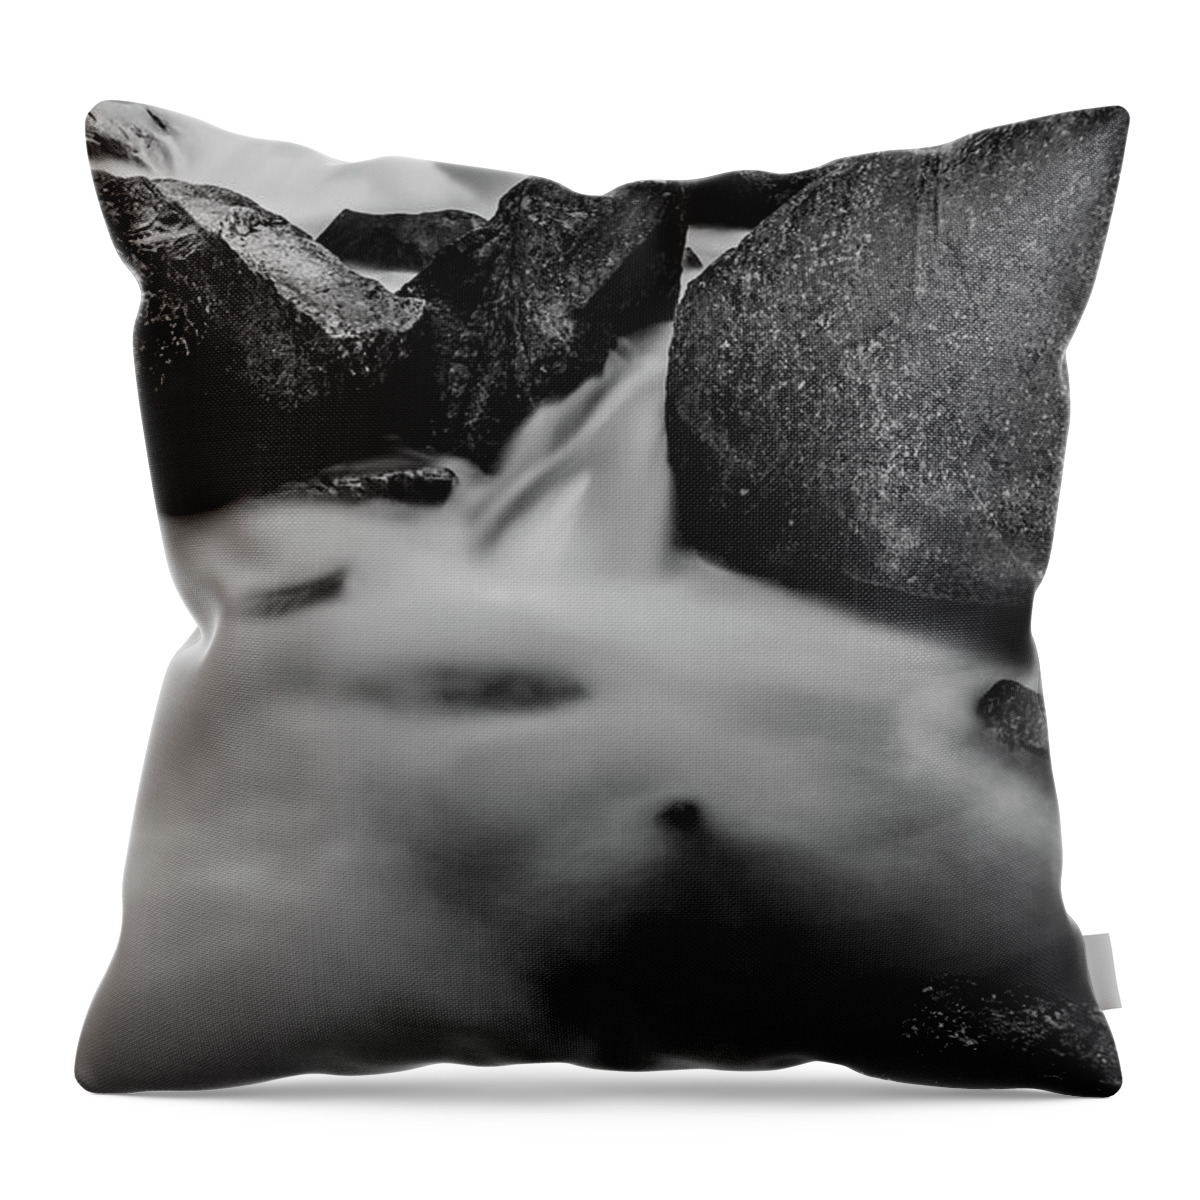 Black And White Throw Pillow featuring the photograph Yosemite, Vernal Falls Detail by Julieta Belmont